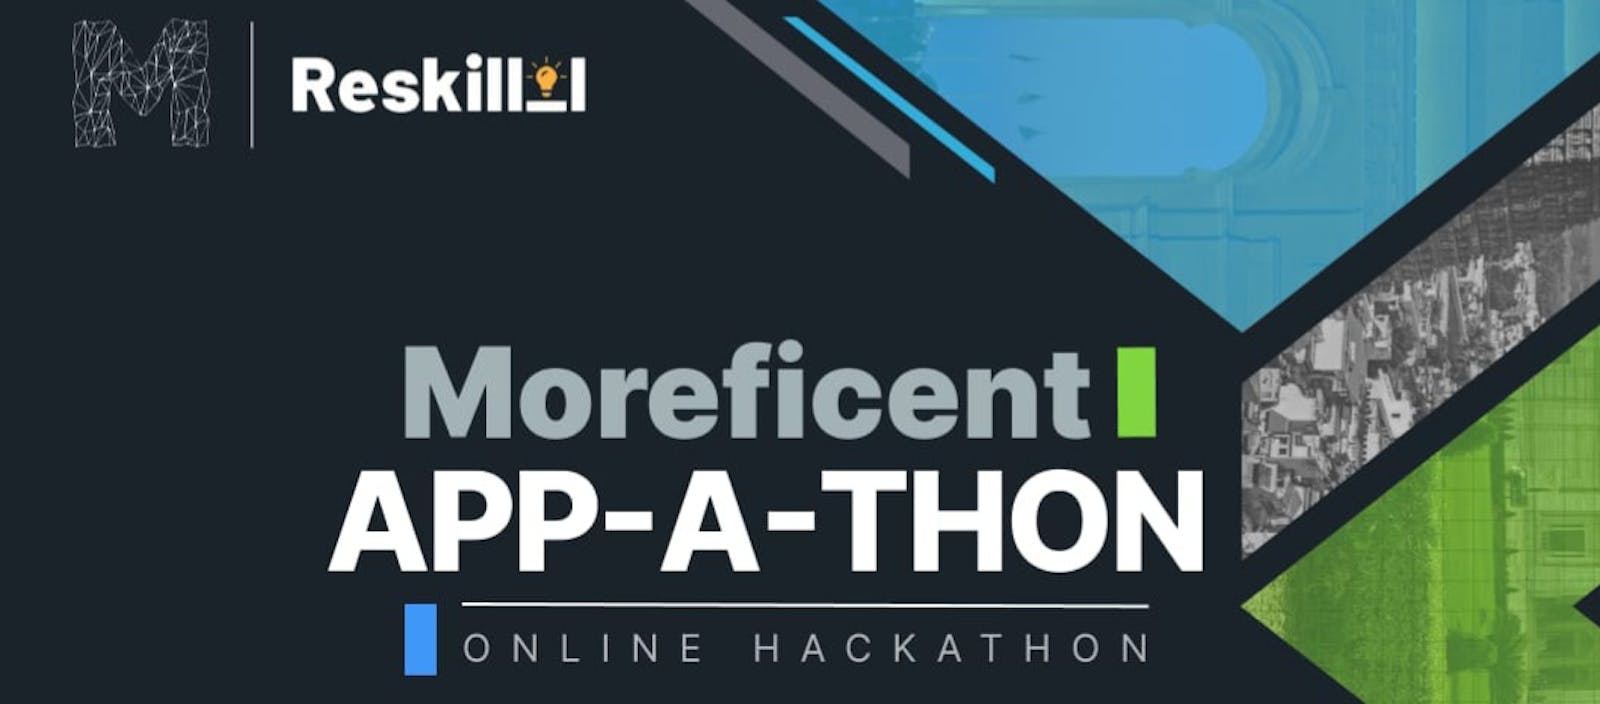 How to build & submit a simple android app using the Moreficent platform ??